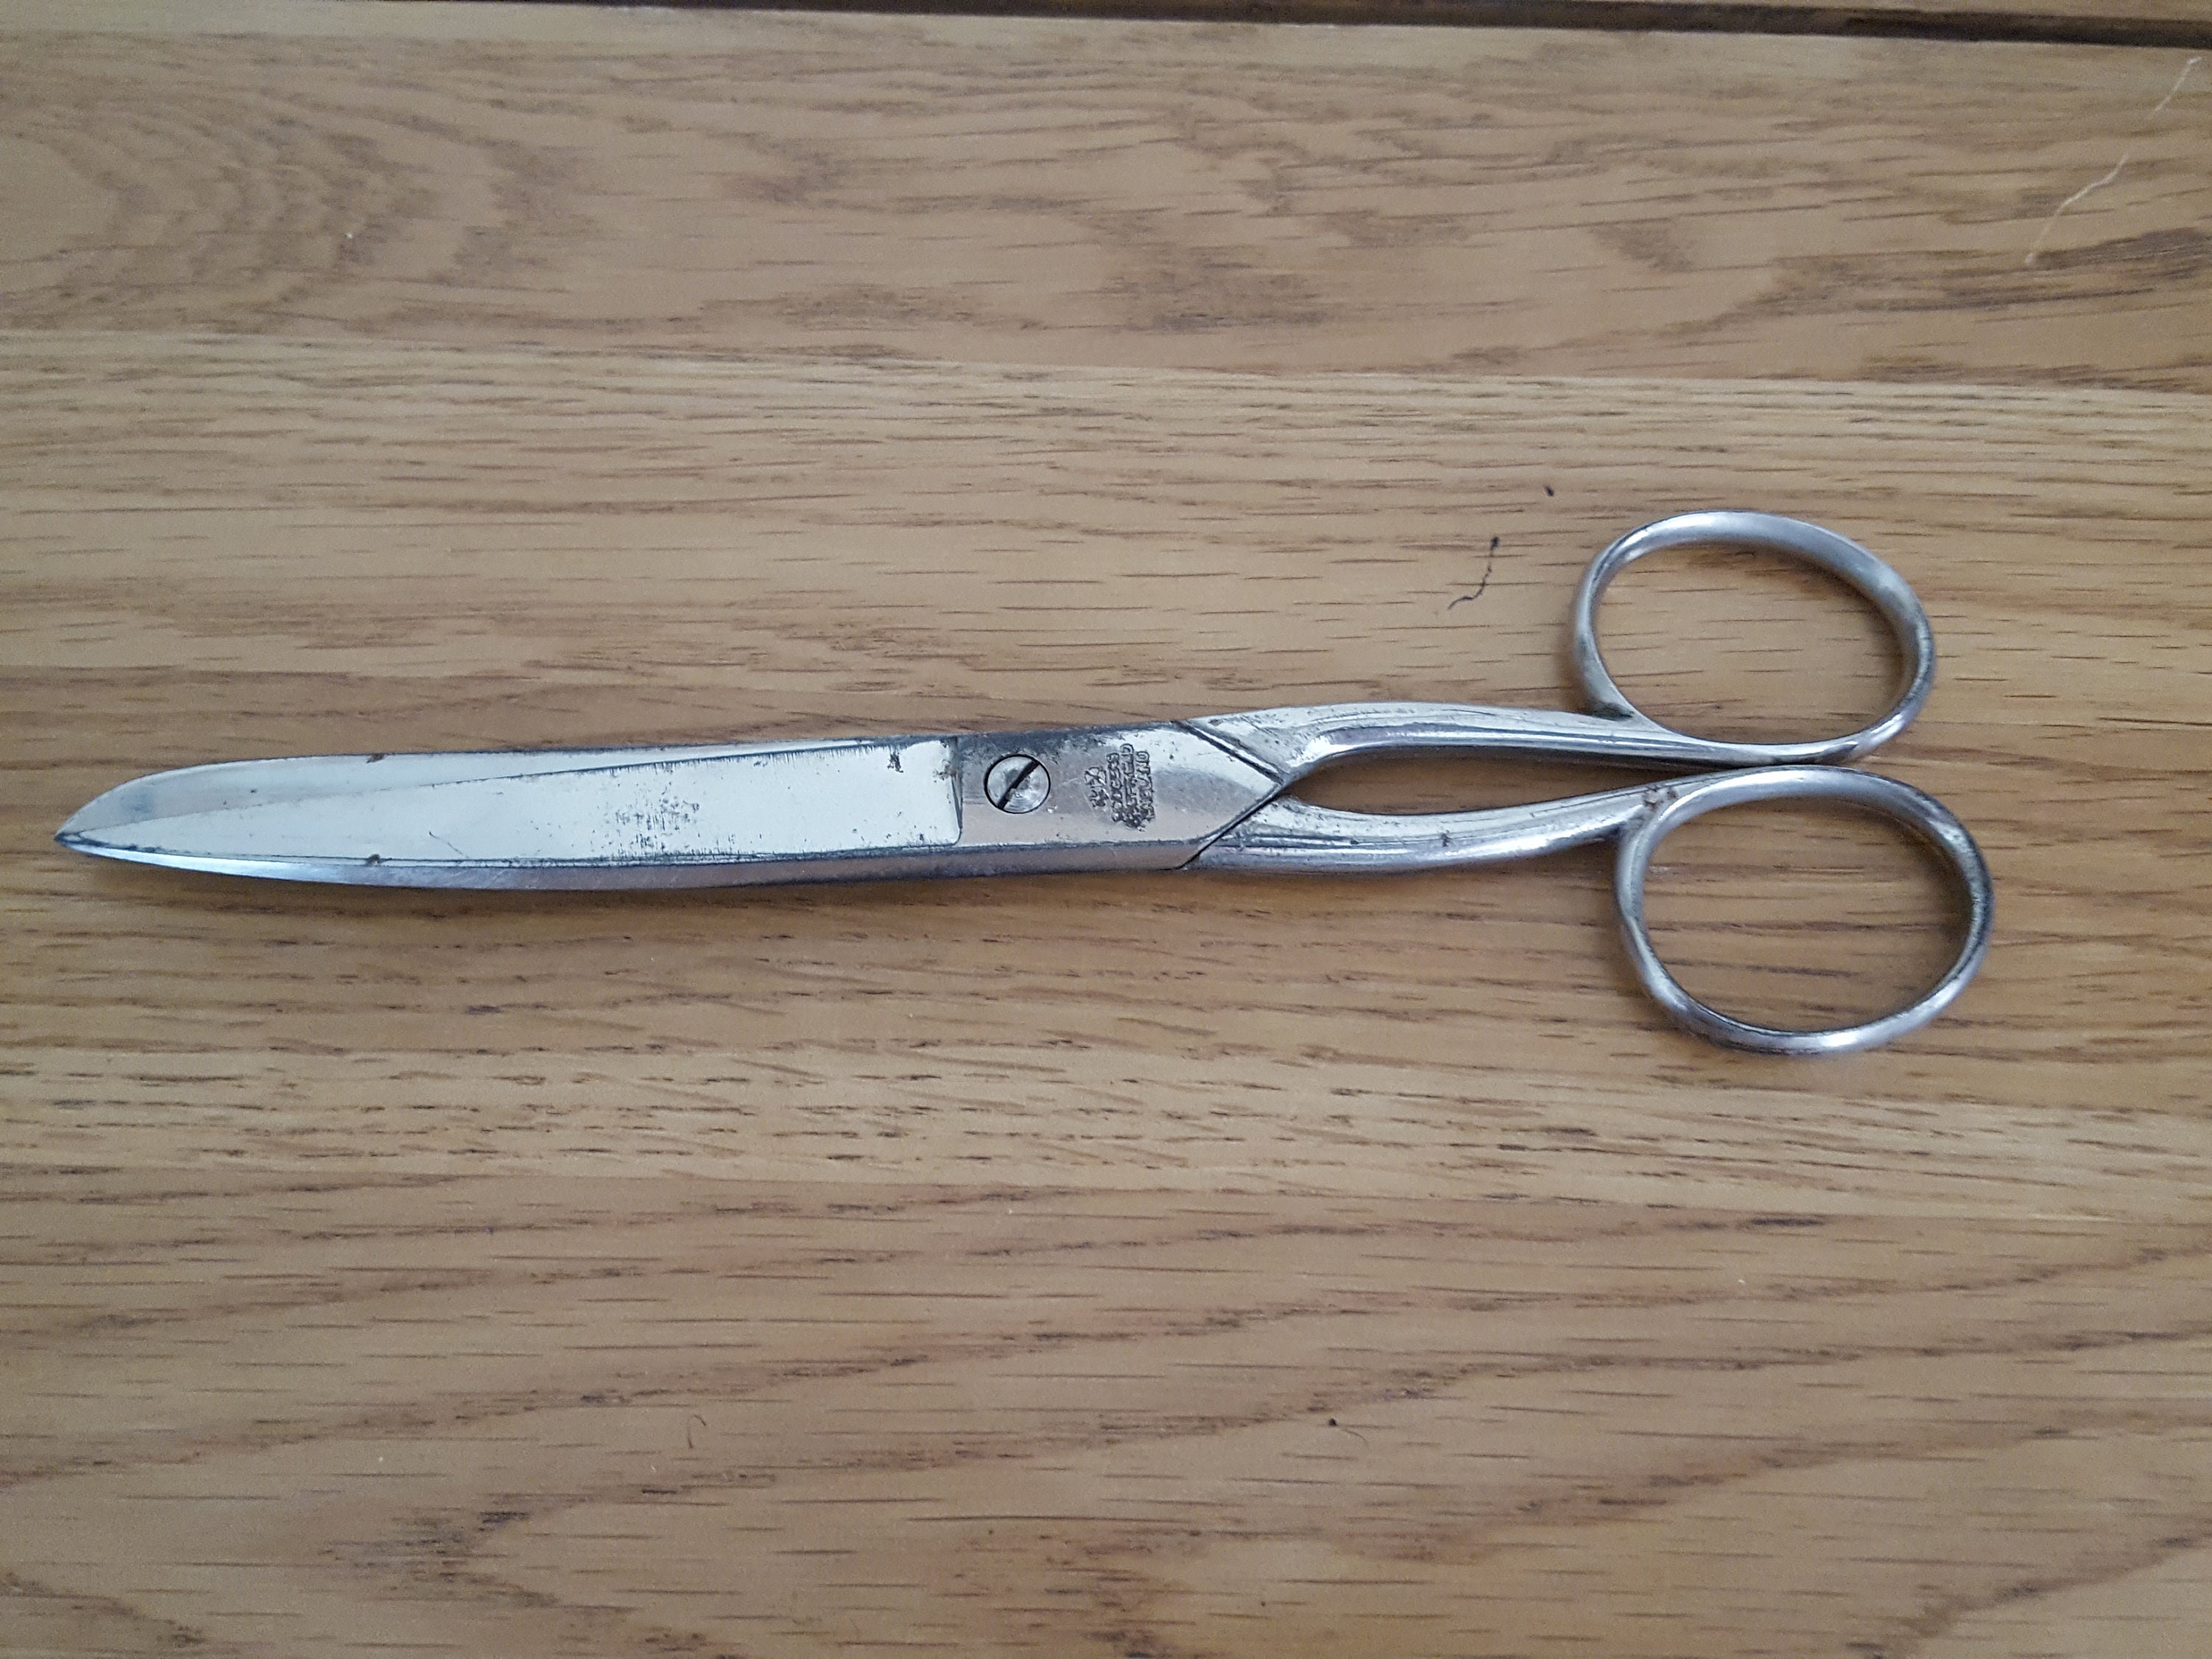 Silver Stork Embroidery Scissors, Sewing Scissors, Quality Crane Craft  Scissors, Knitting and Crochet 